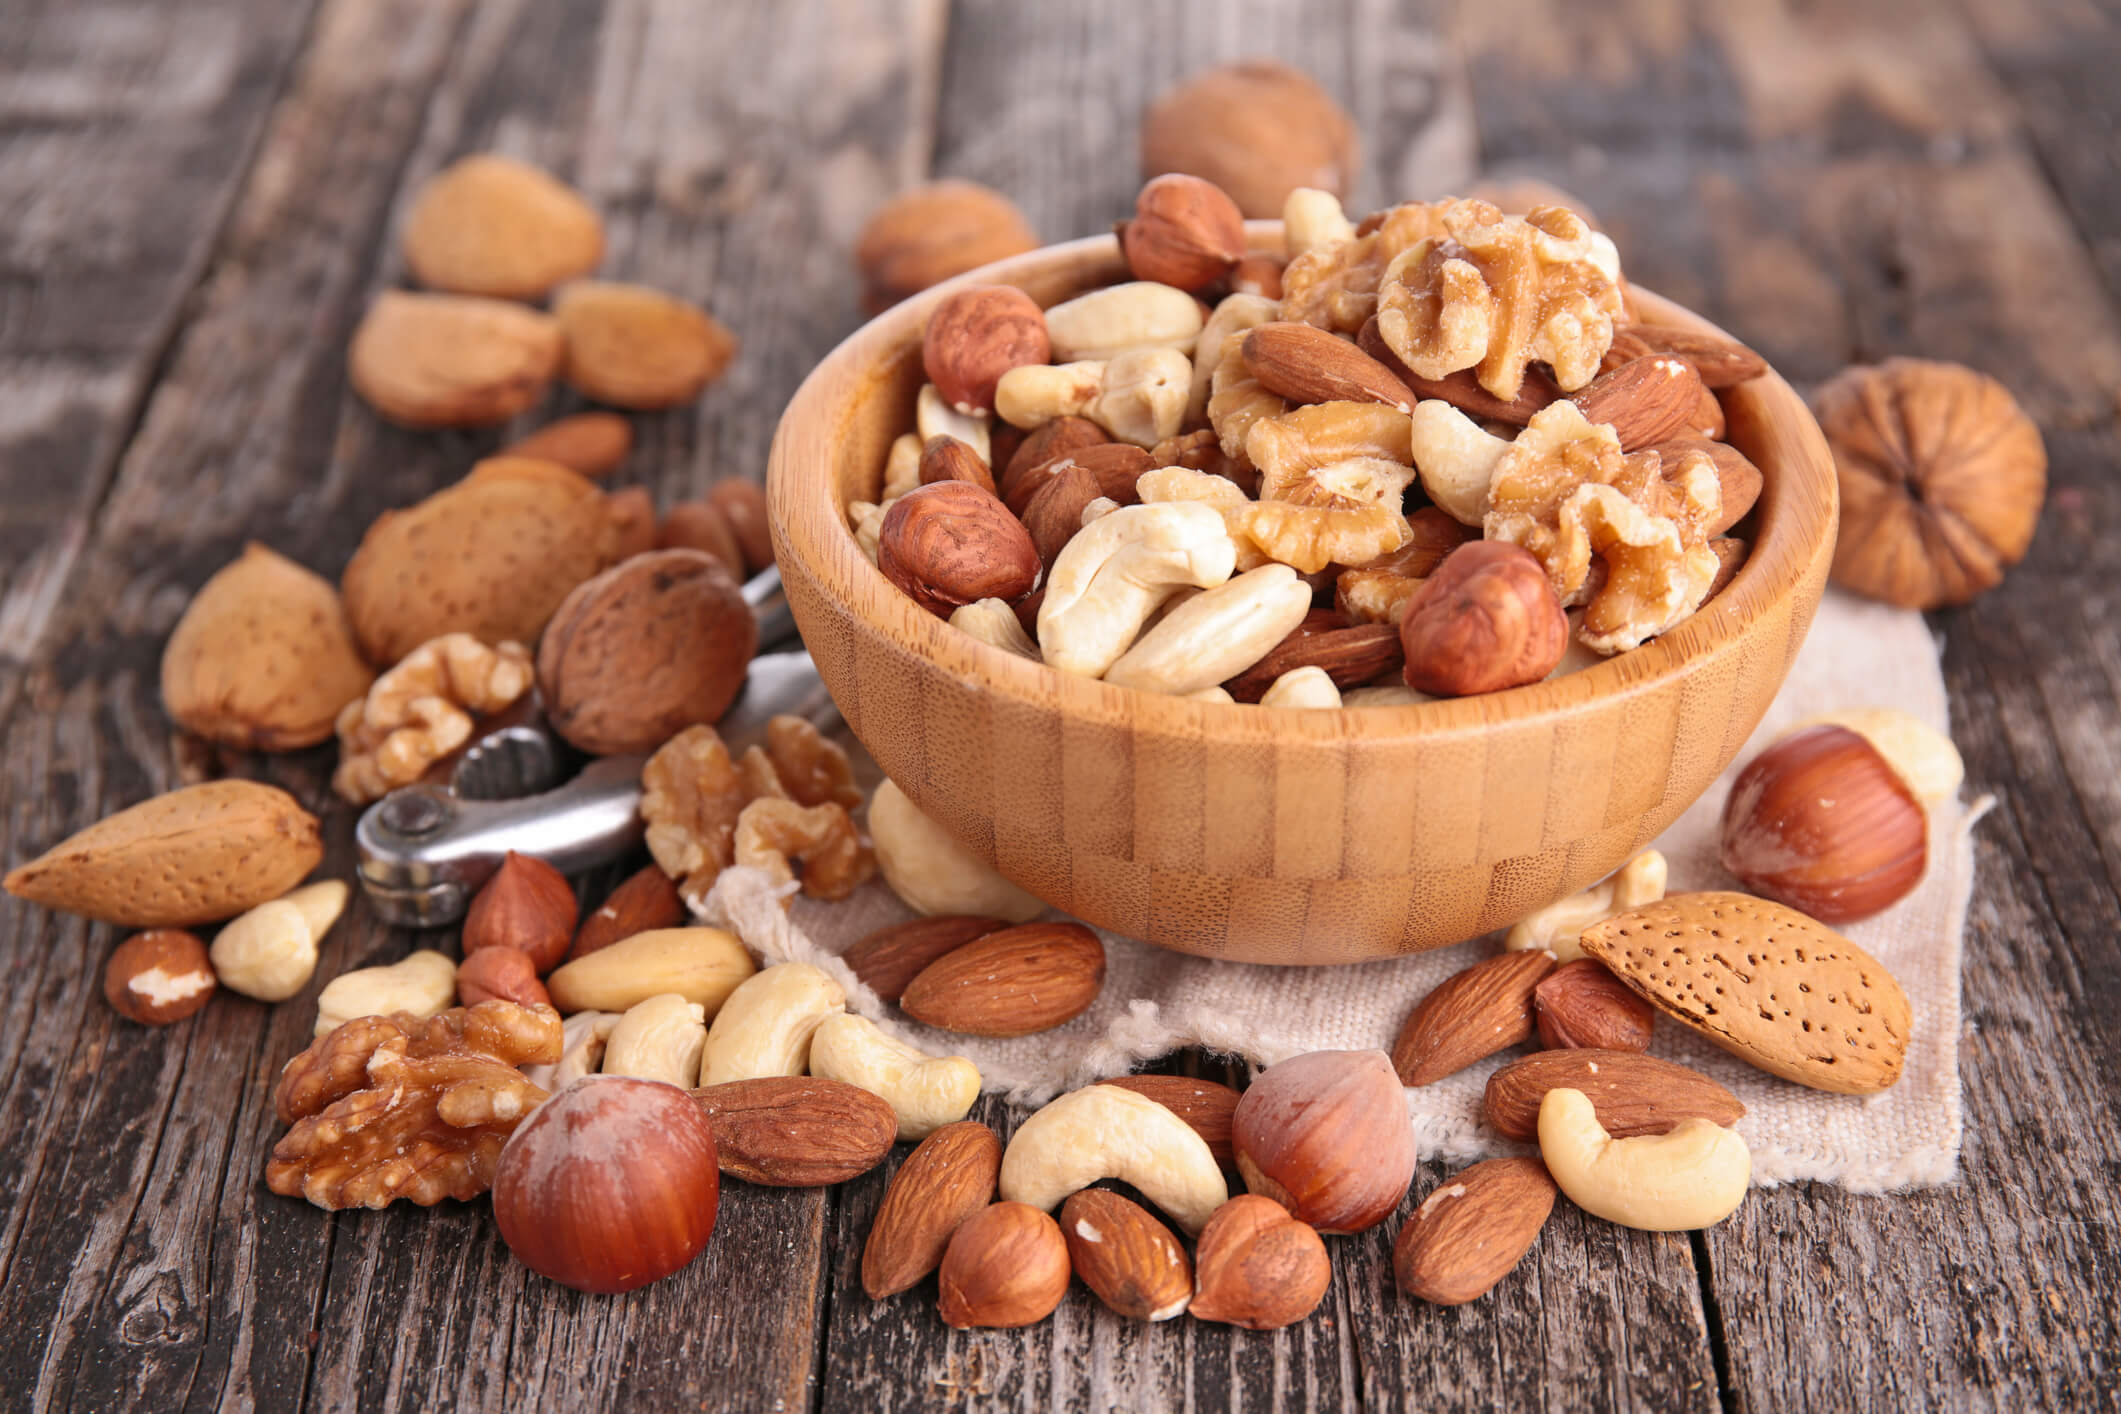 Prevent cancer by eating nuts